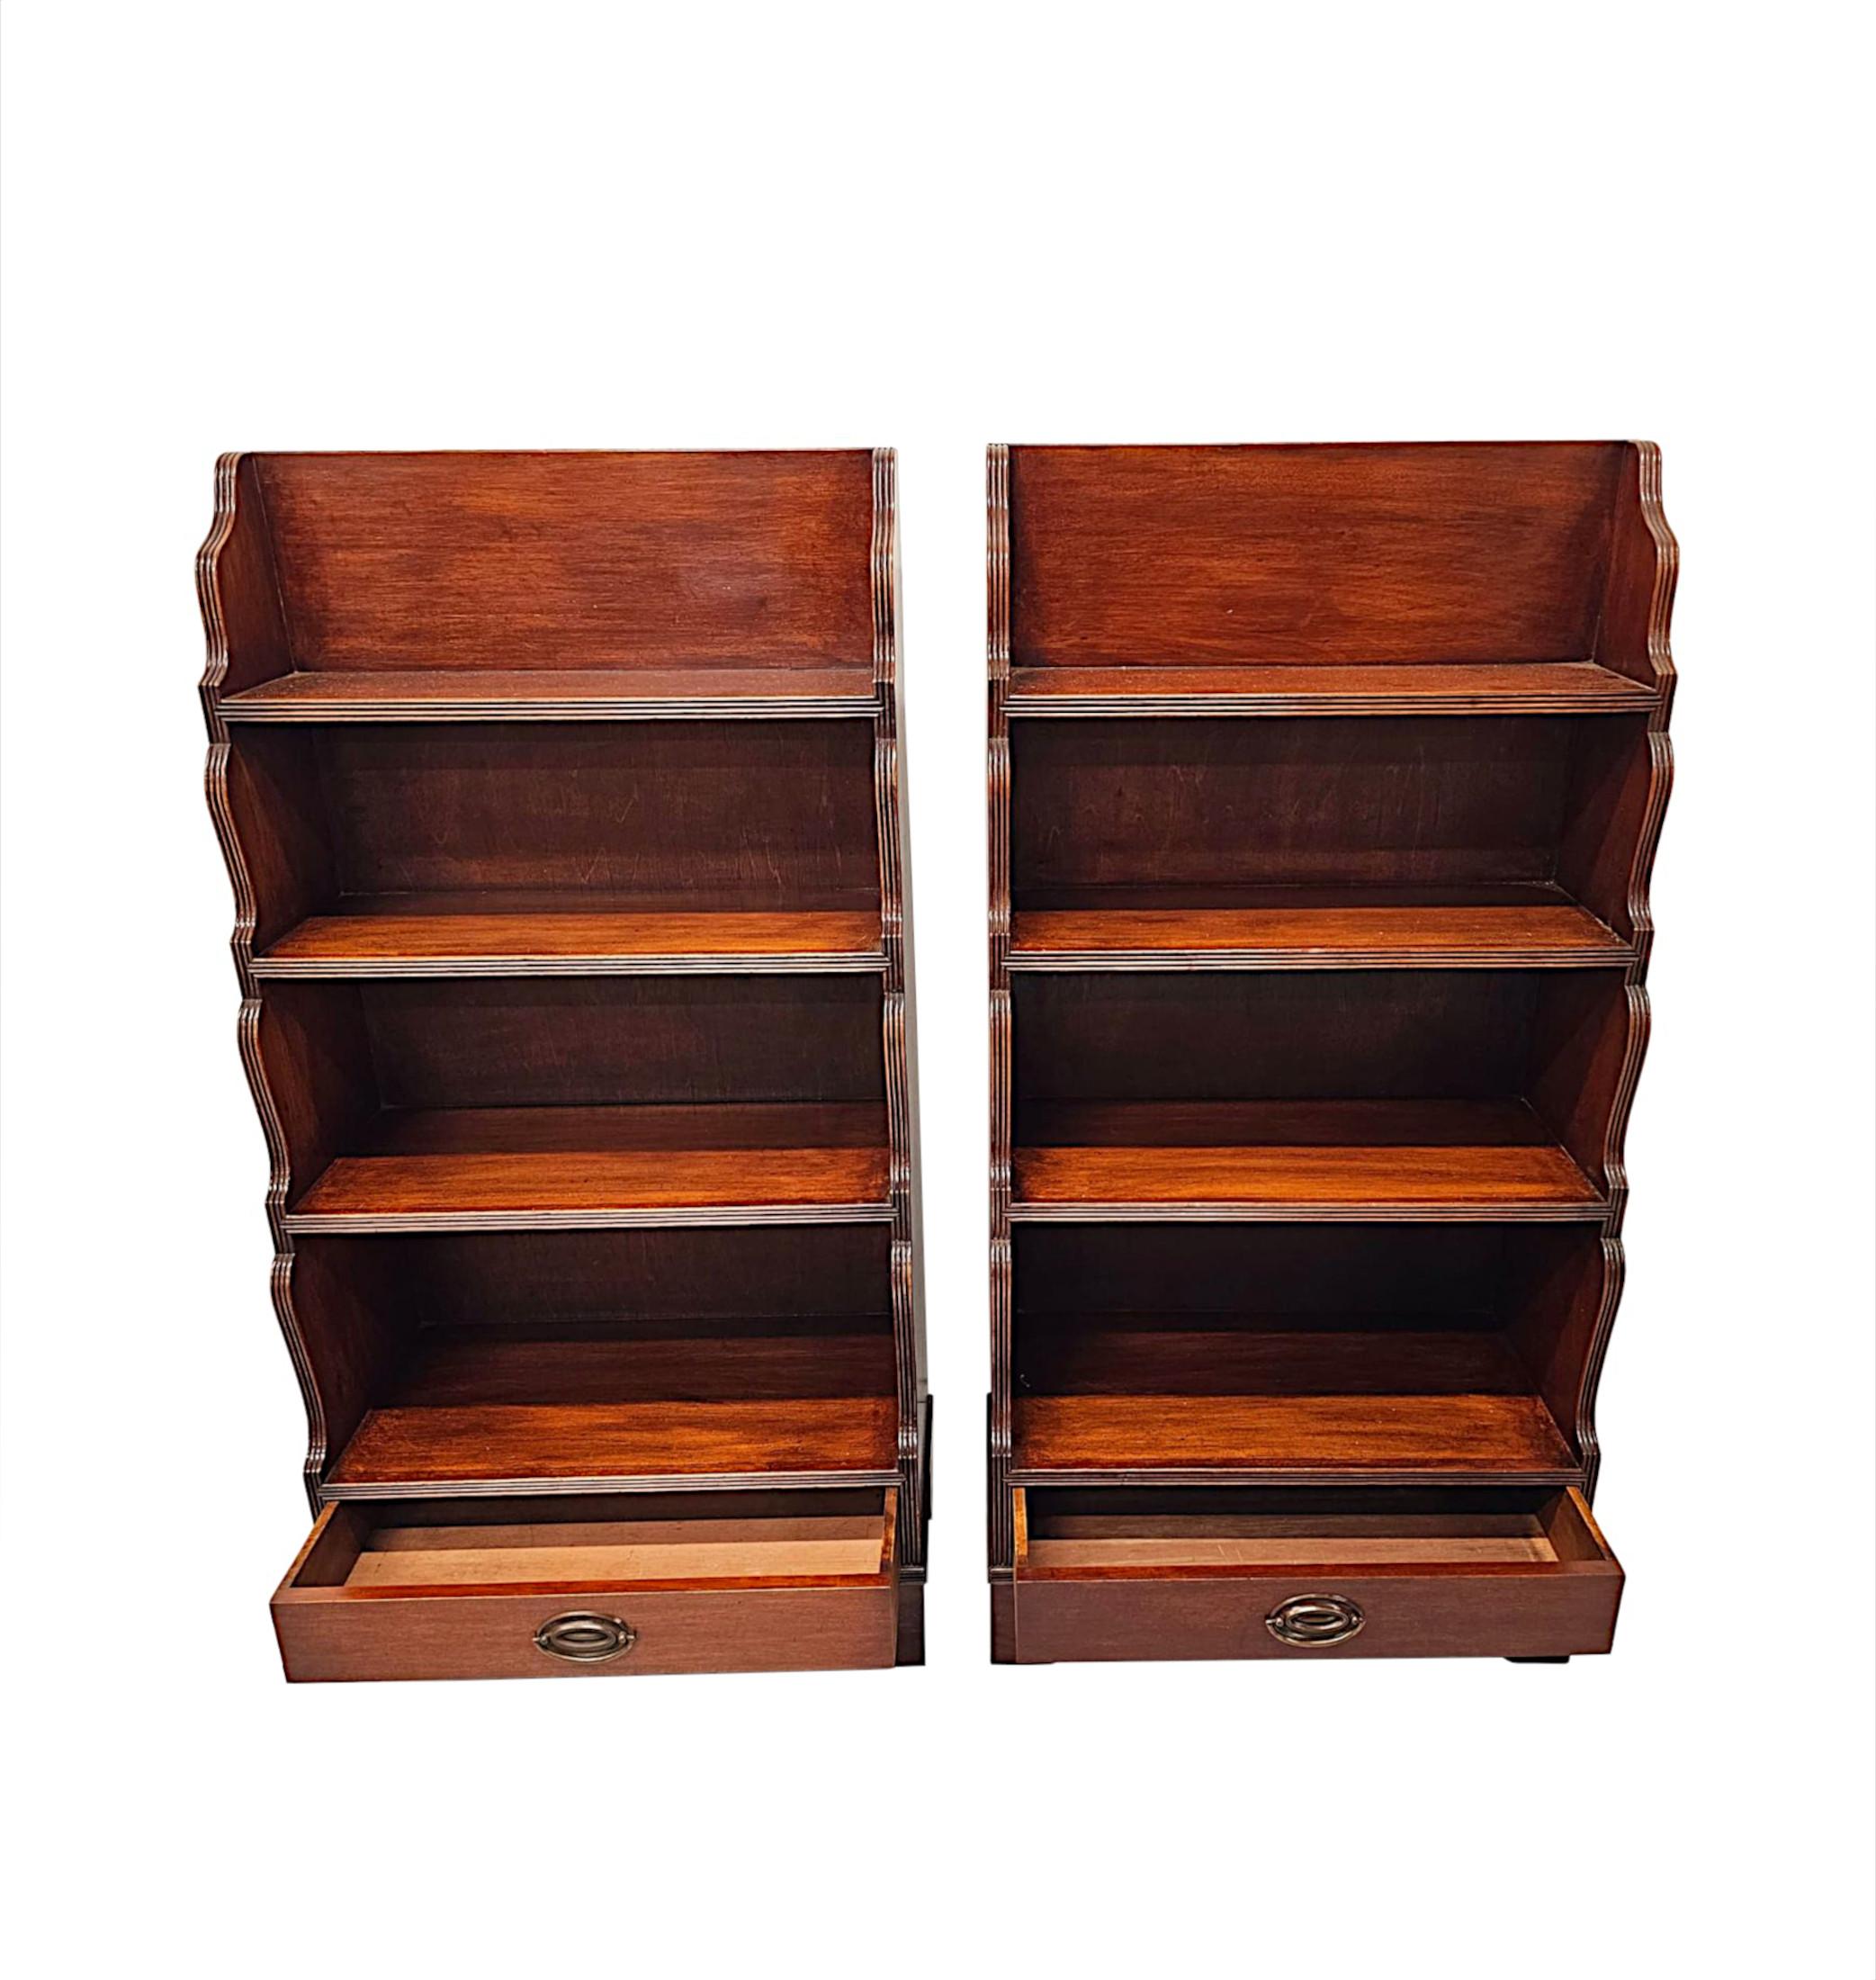 A fabulous pair of Edwardian mahogany open waterfall bookcases, finely carved, of neat proportions with deeply rich patination and grain.  The four moulded graduated shelves are set within gorgeous serpentine side supports, all with reeded border